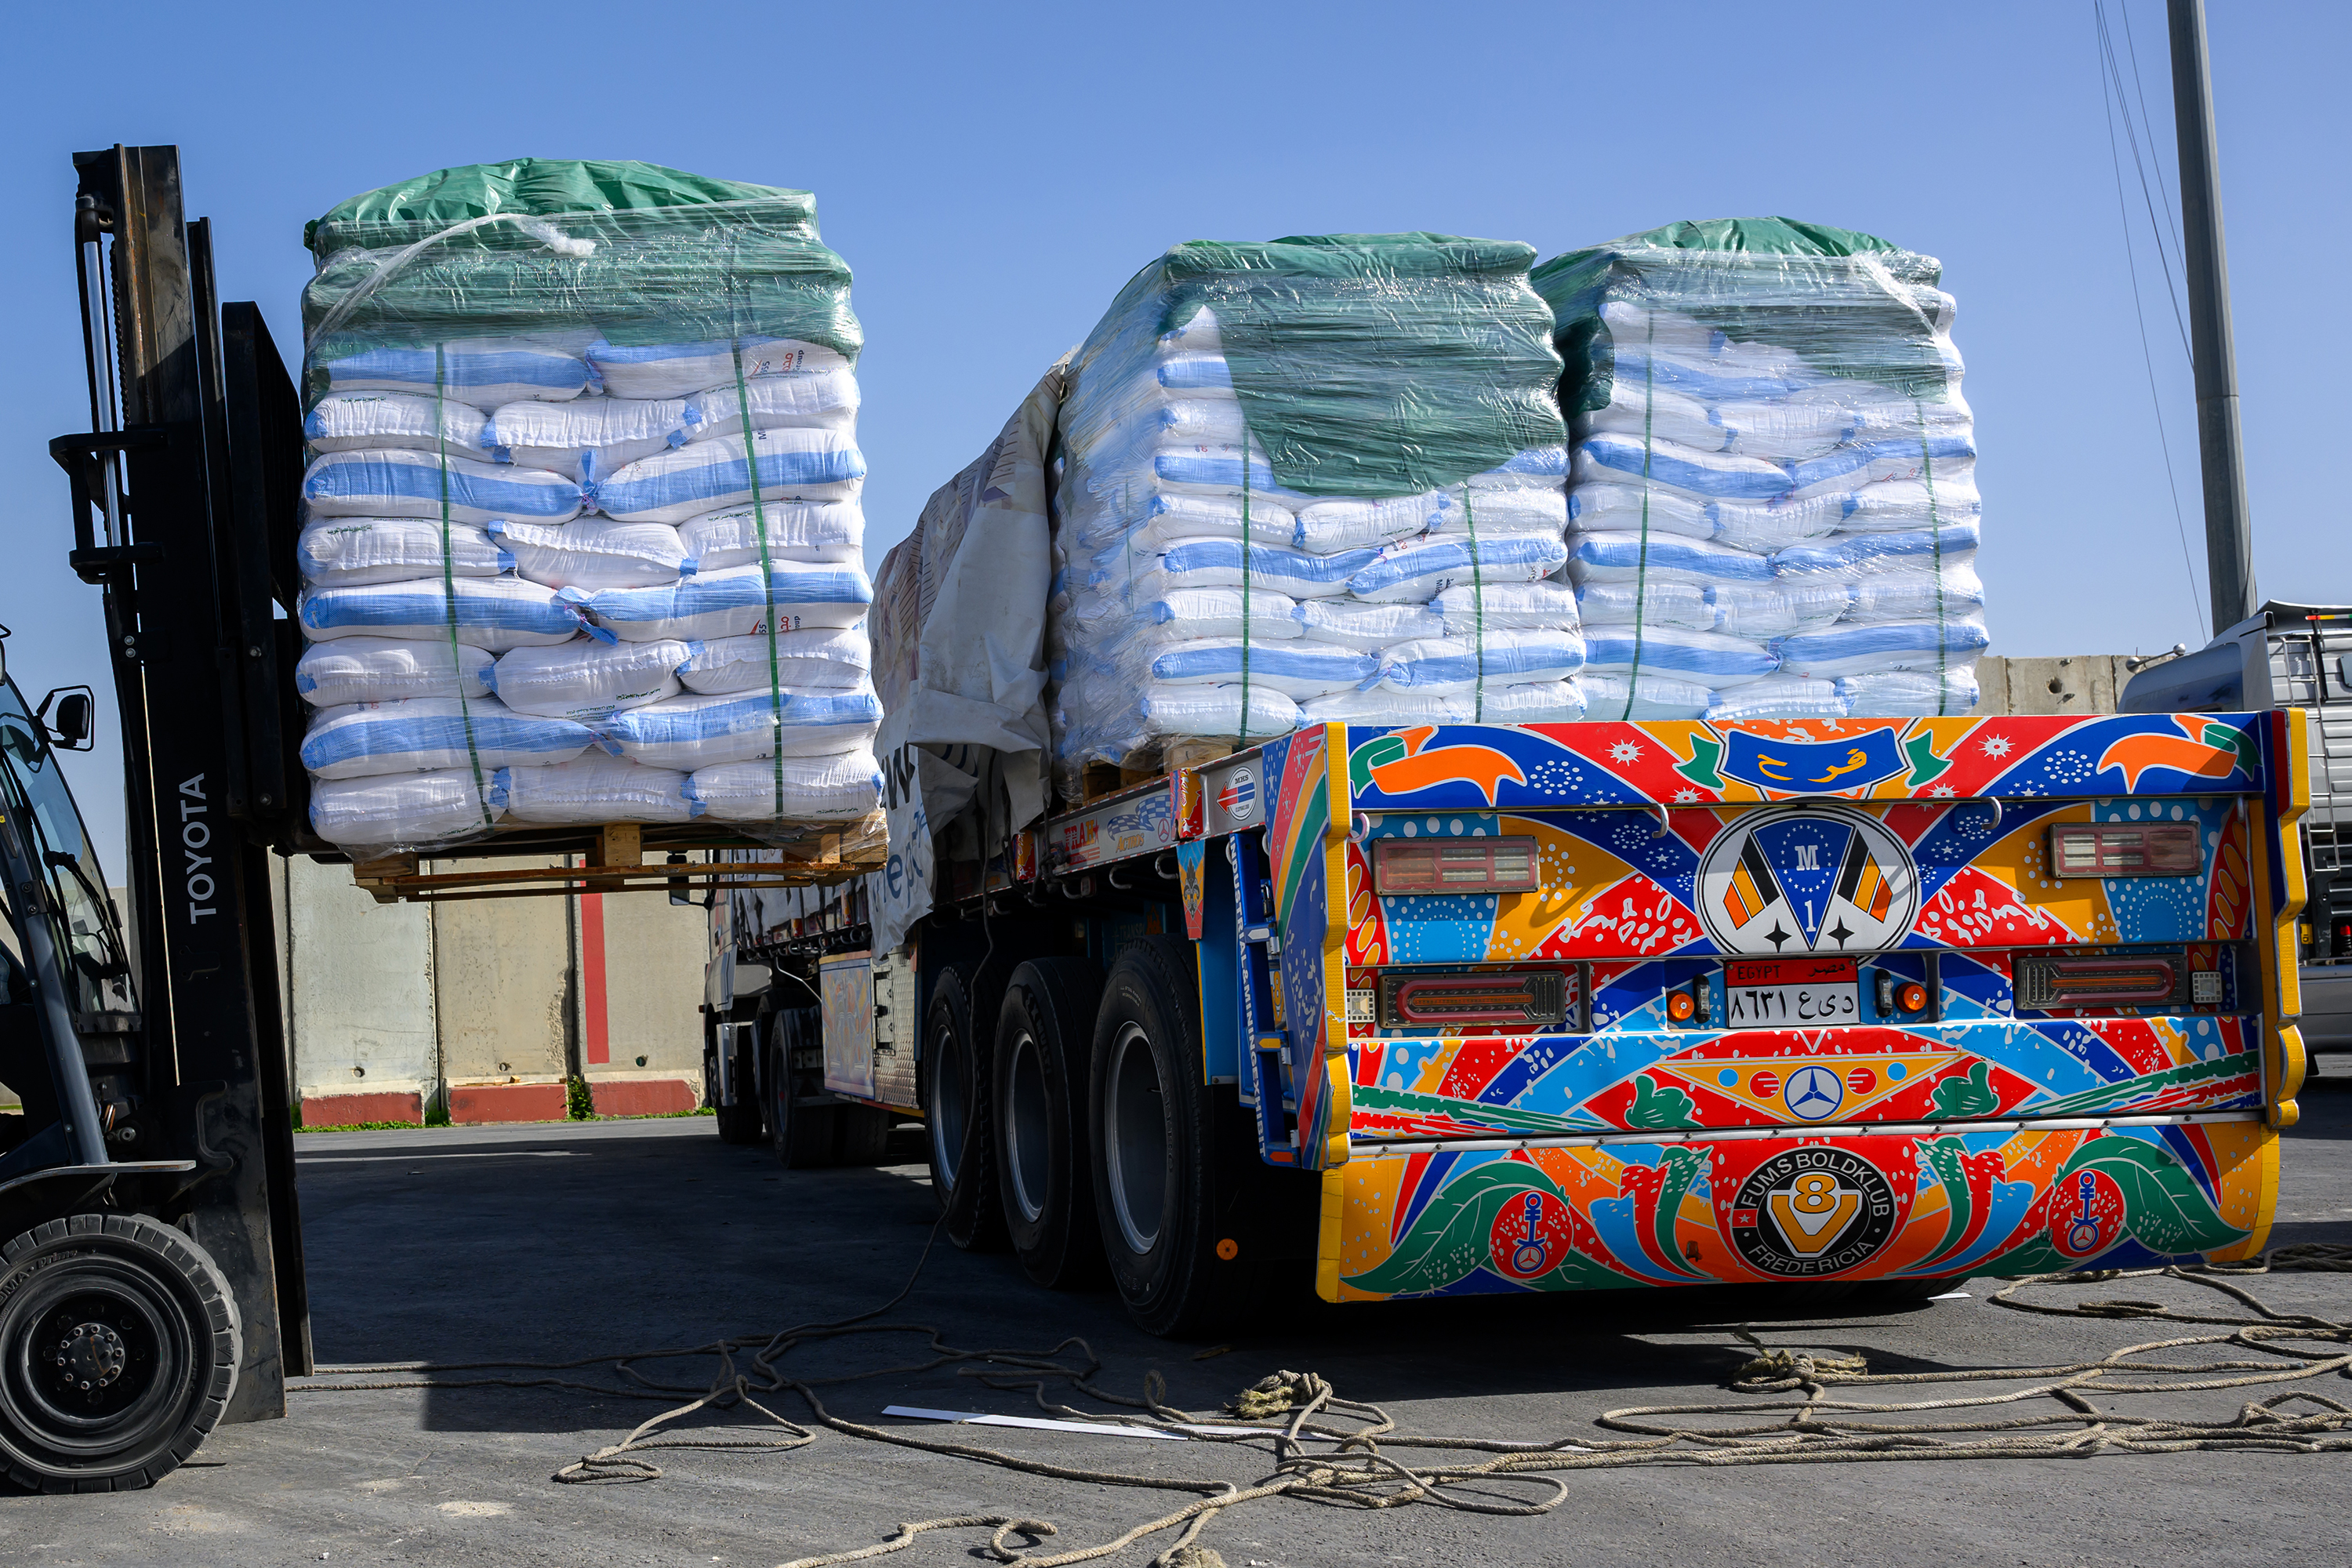 Pallets of humanitarian aid are unloaded and inspected before entering Gaza at the Kerem Shalom Crossing on December 22, Kerem Shalom, Israel.